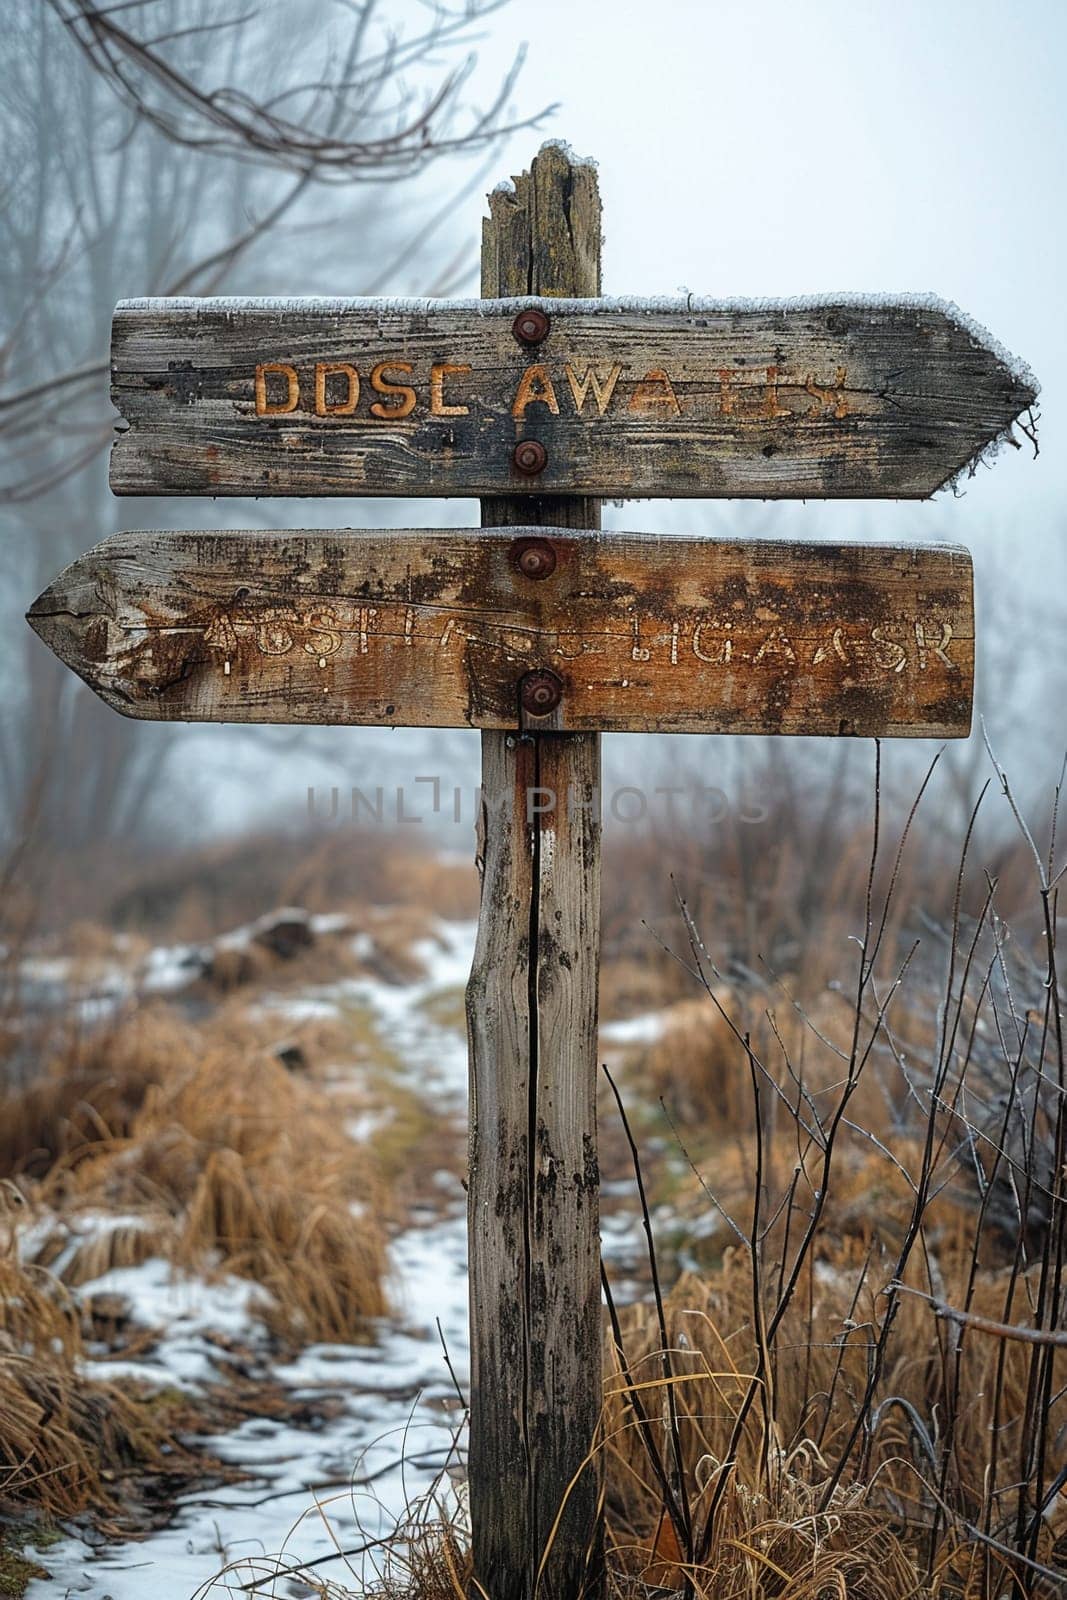 A weathered wooden signpost in a rural setting, pointing in multiple directions, evoking choice and adventure.